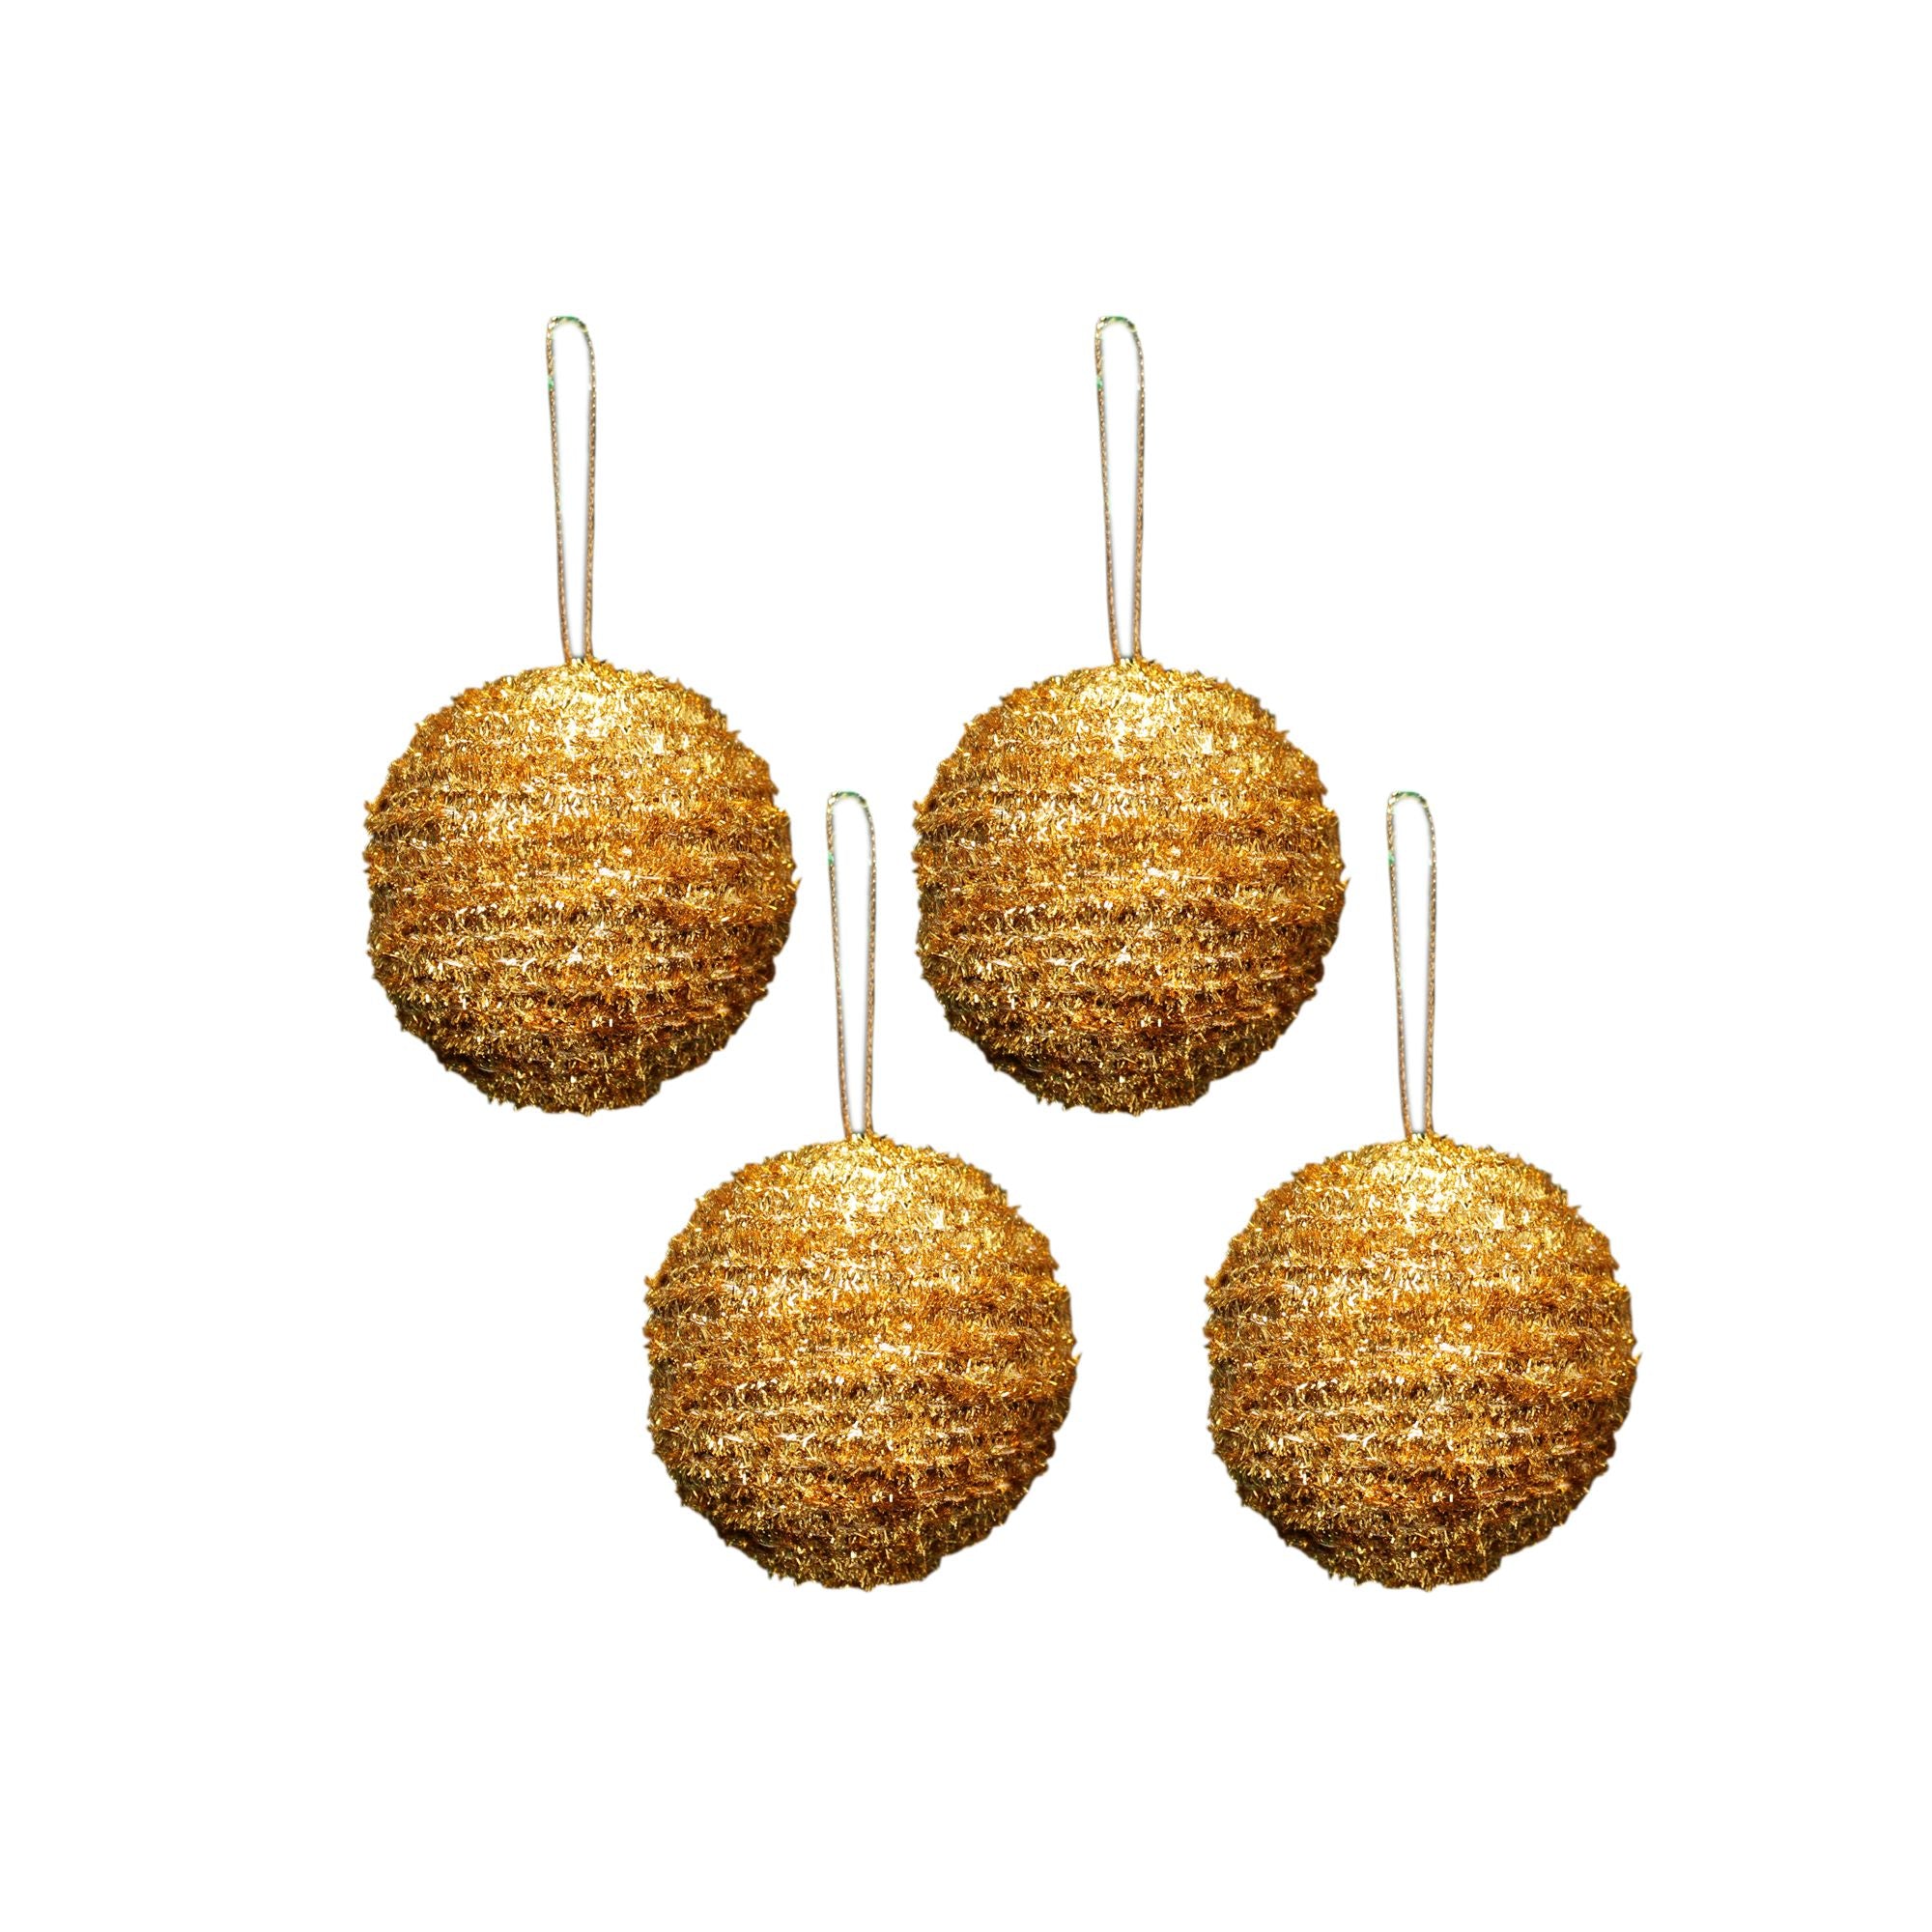 Handmade Christmas Ornaments - Tinsel Baubles 60mm, Gold, 4pc